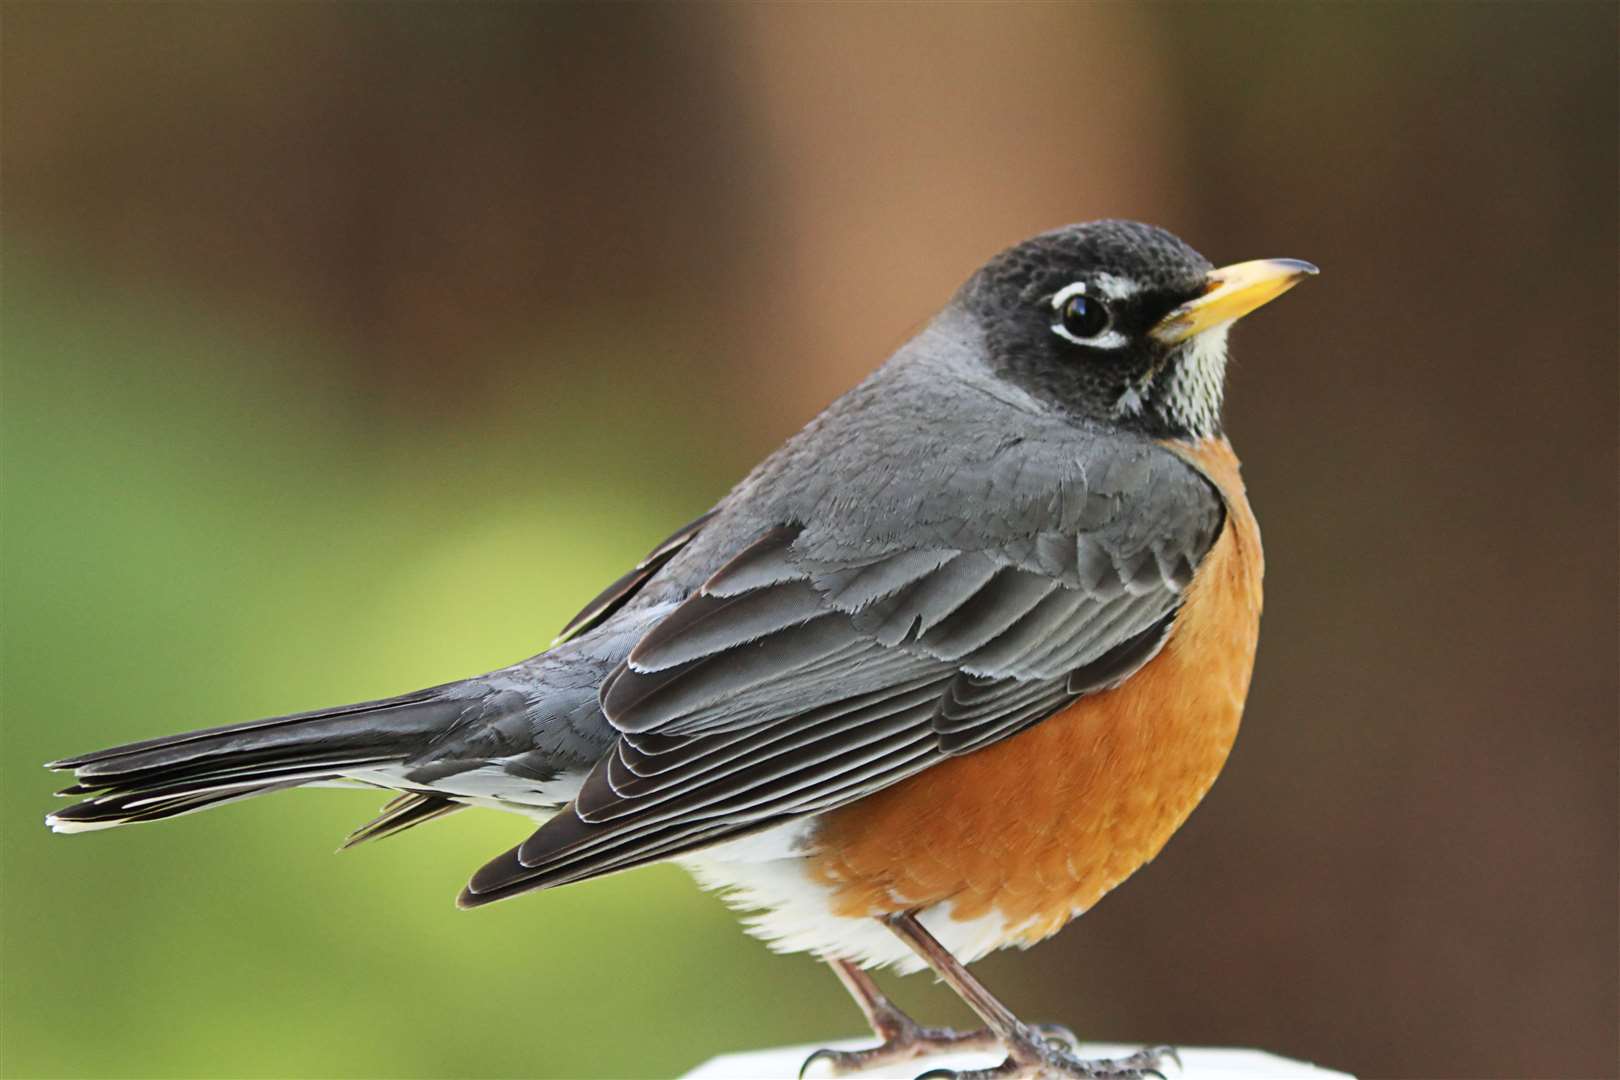 The American robin is a member of the thrush family, and is larger than its British namesake.